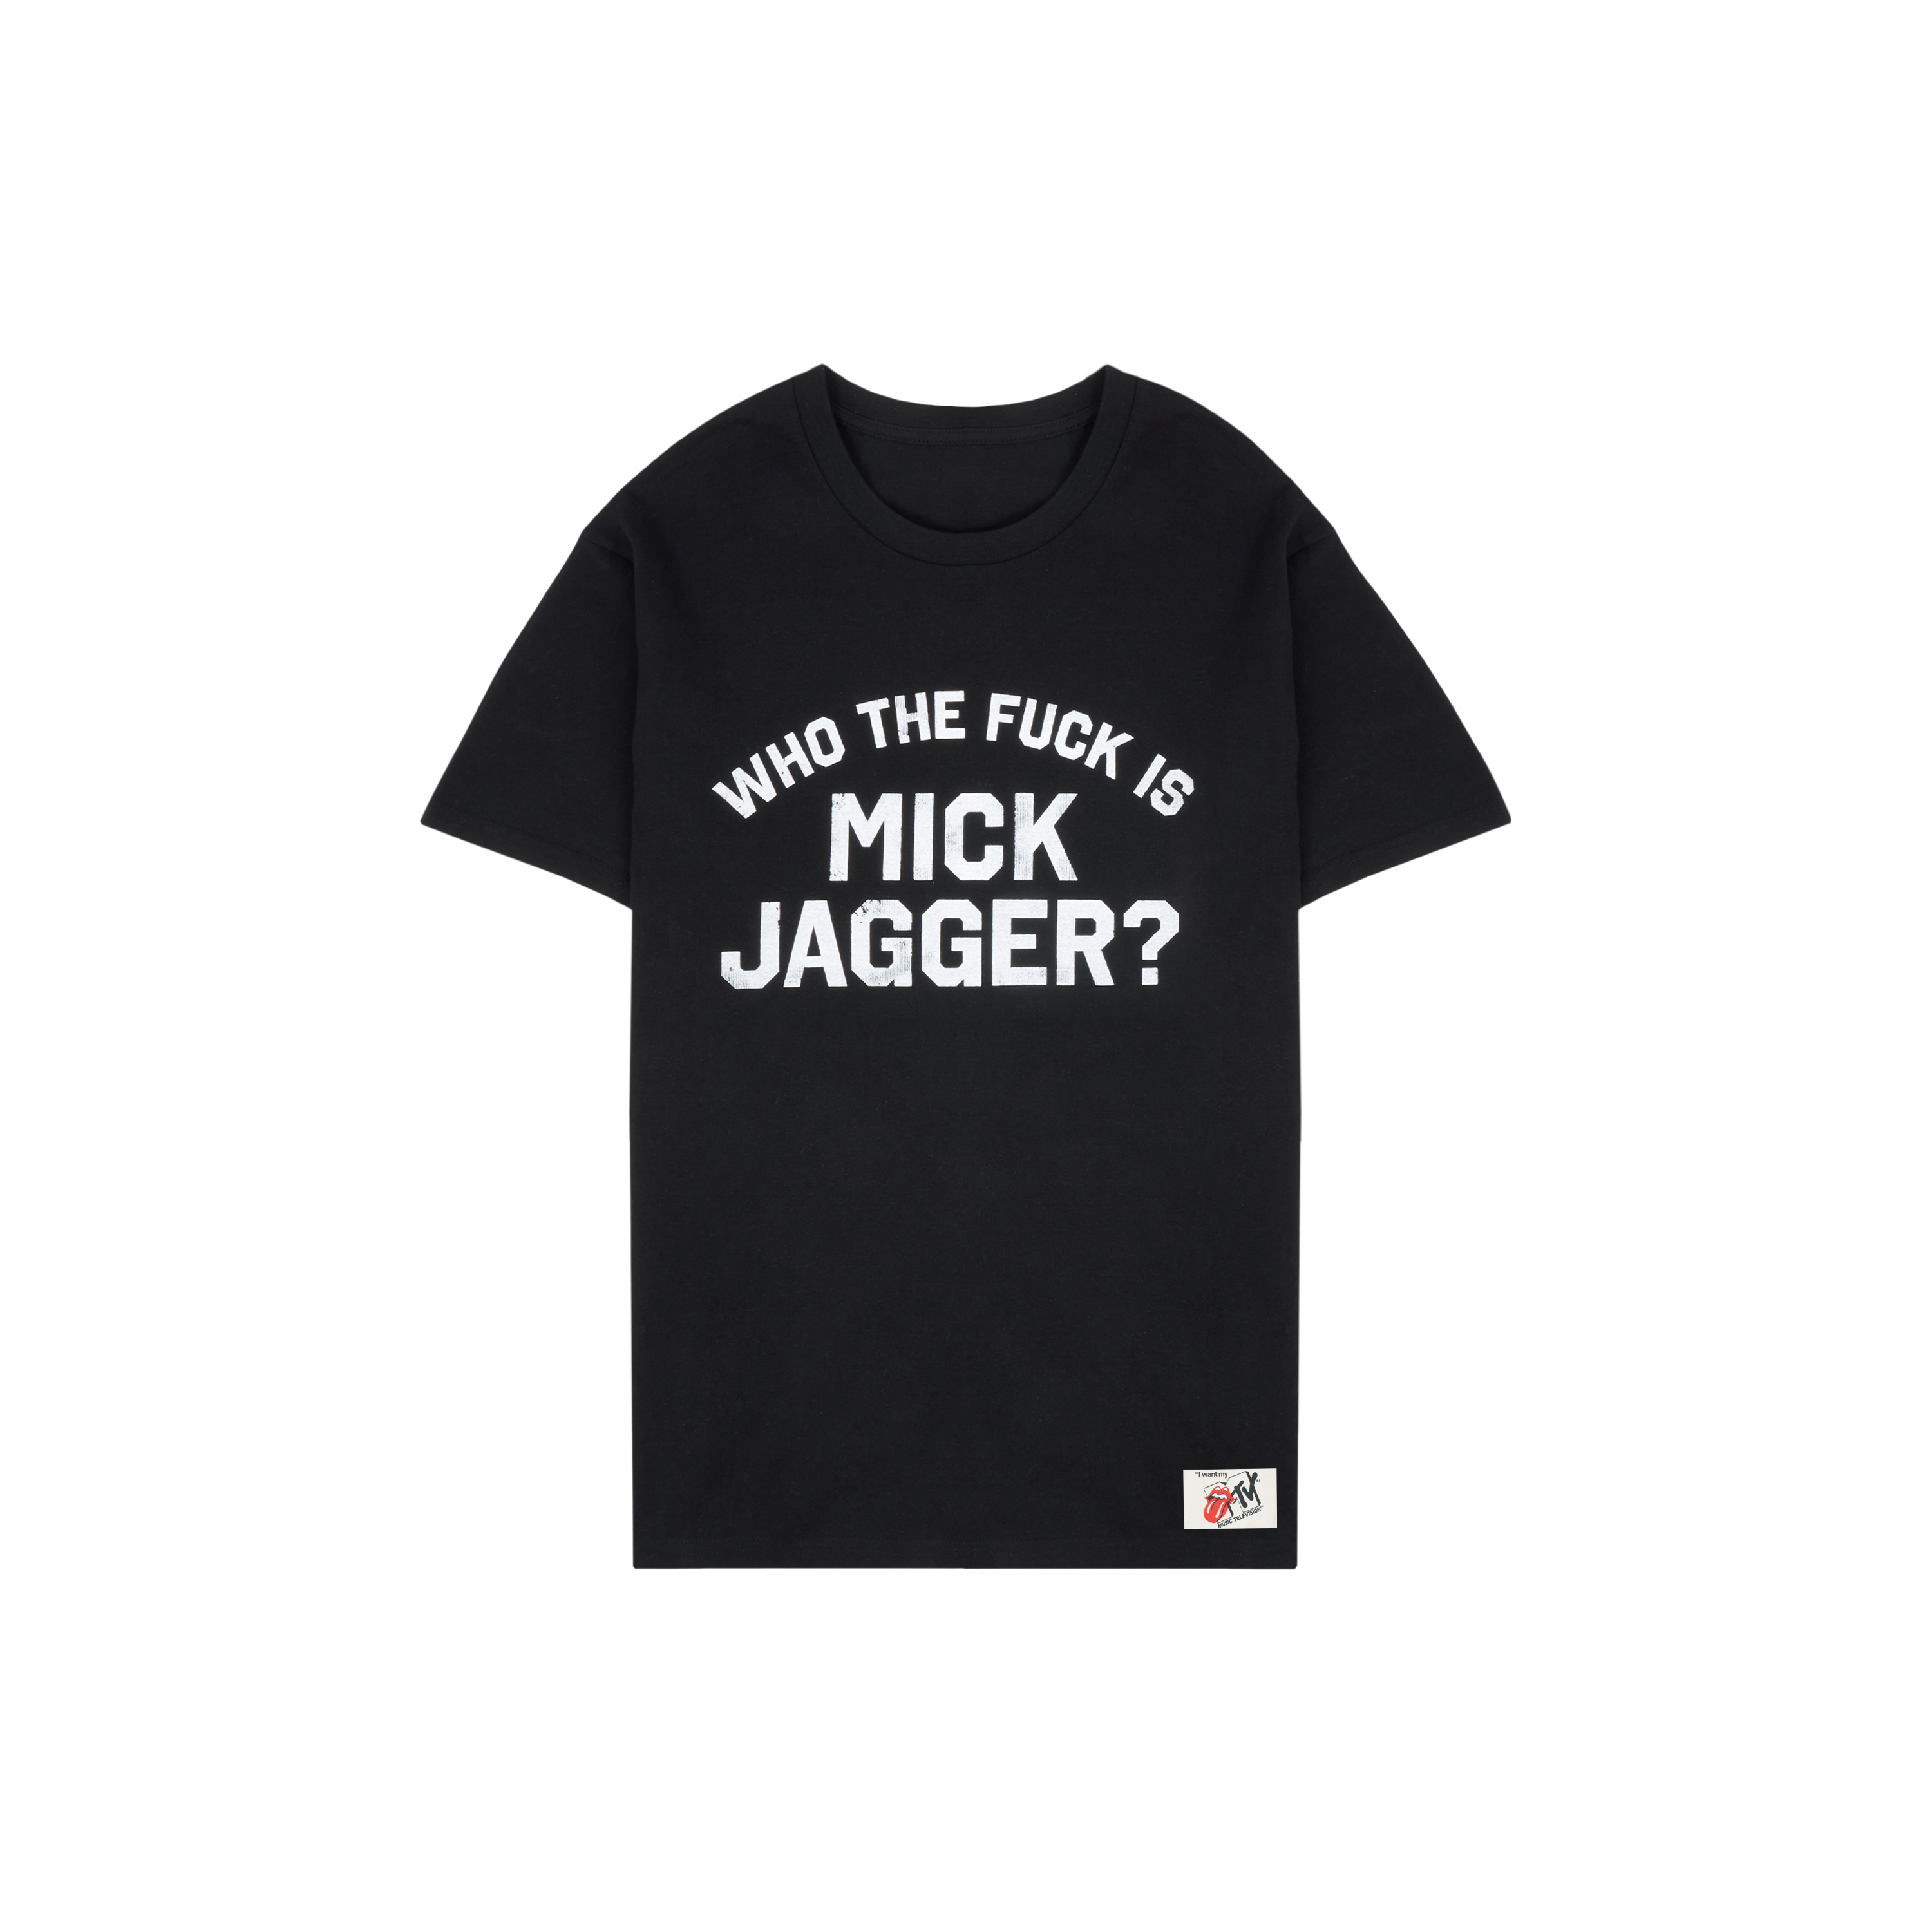 Carnaby - Rolling Stones x MTV Who The F Is Mick Jagger? T-Shirt